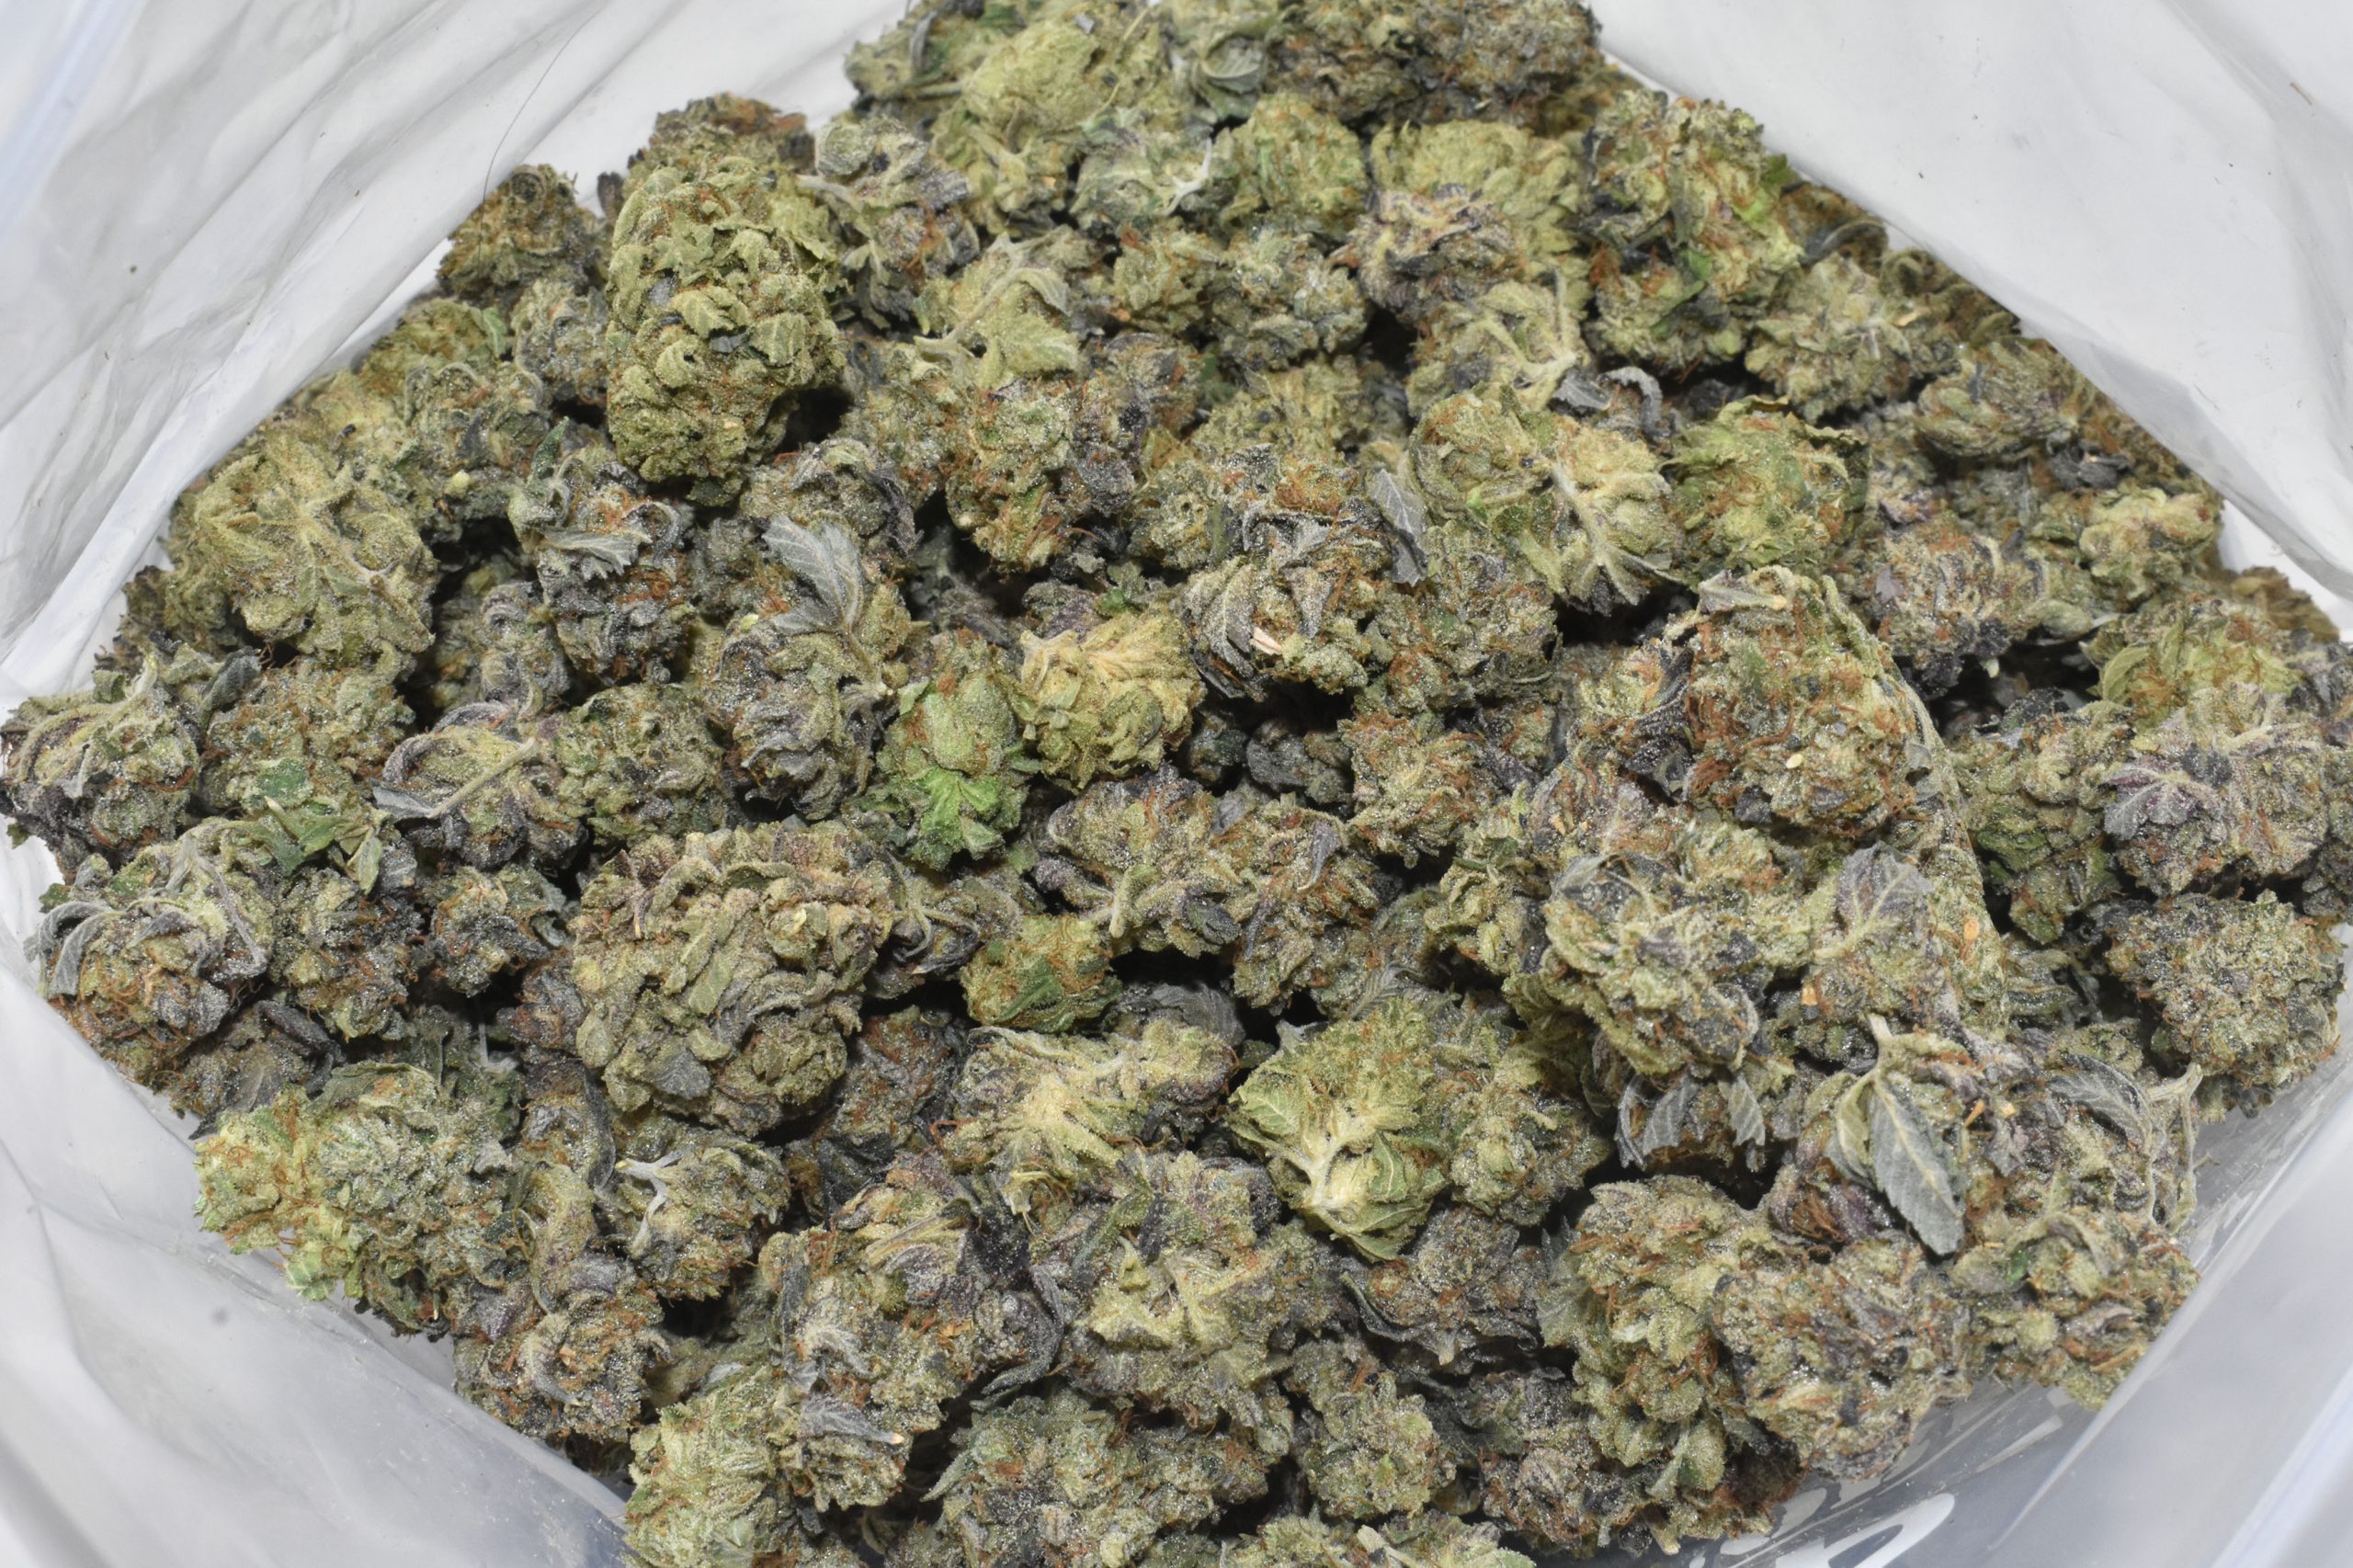 buy-dream-berry-popcorn-at-chronicfarms.cc-online-weed-dispensary